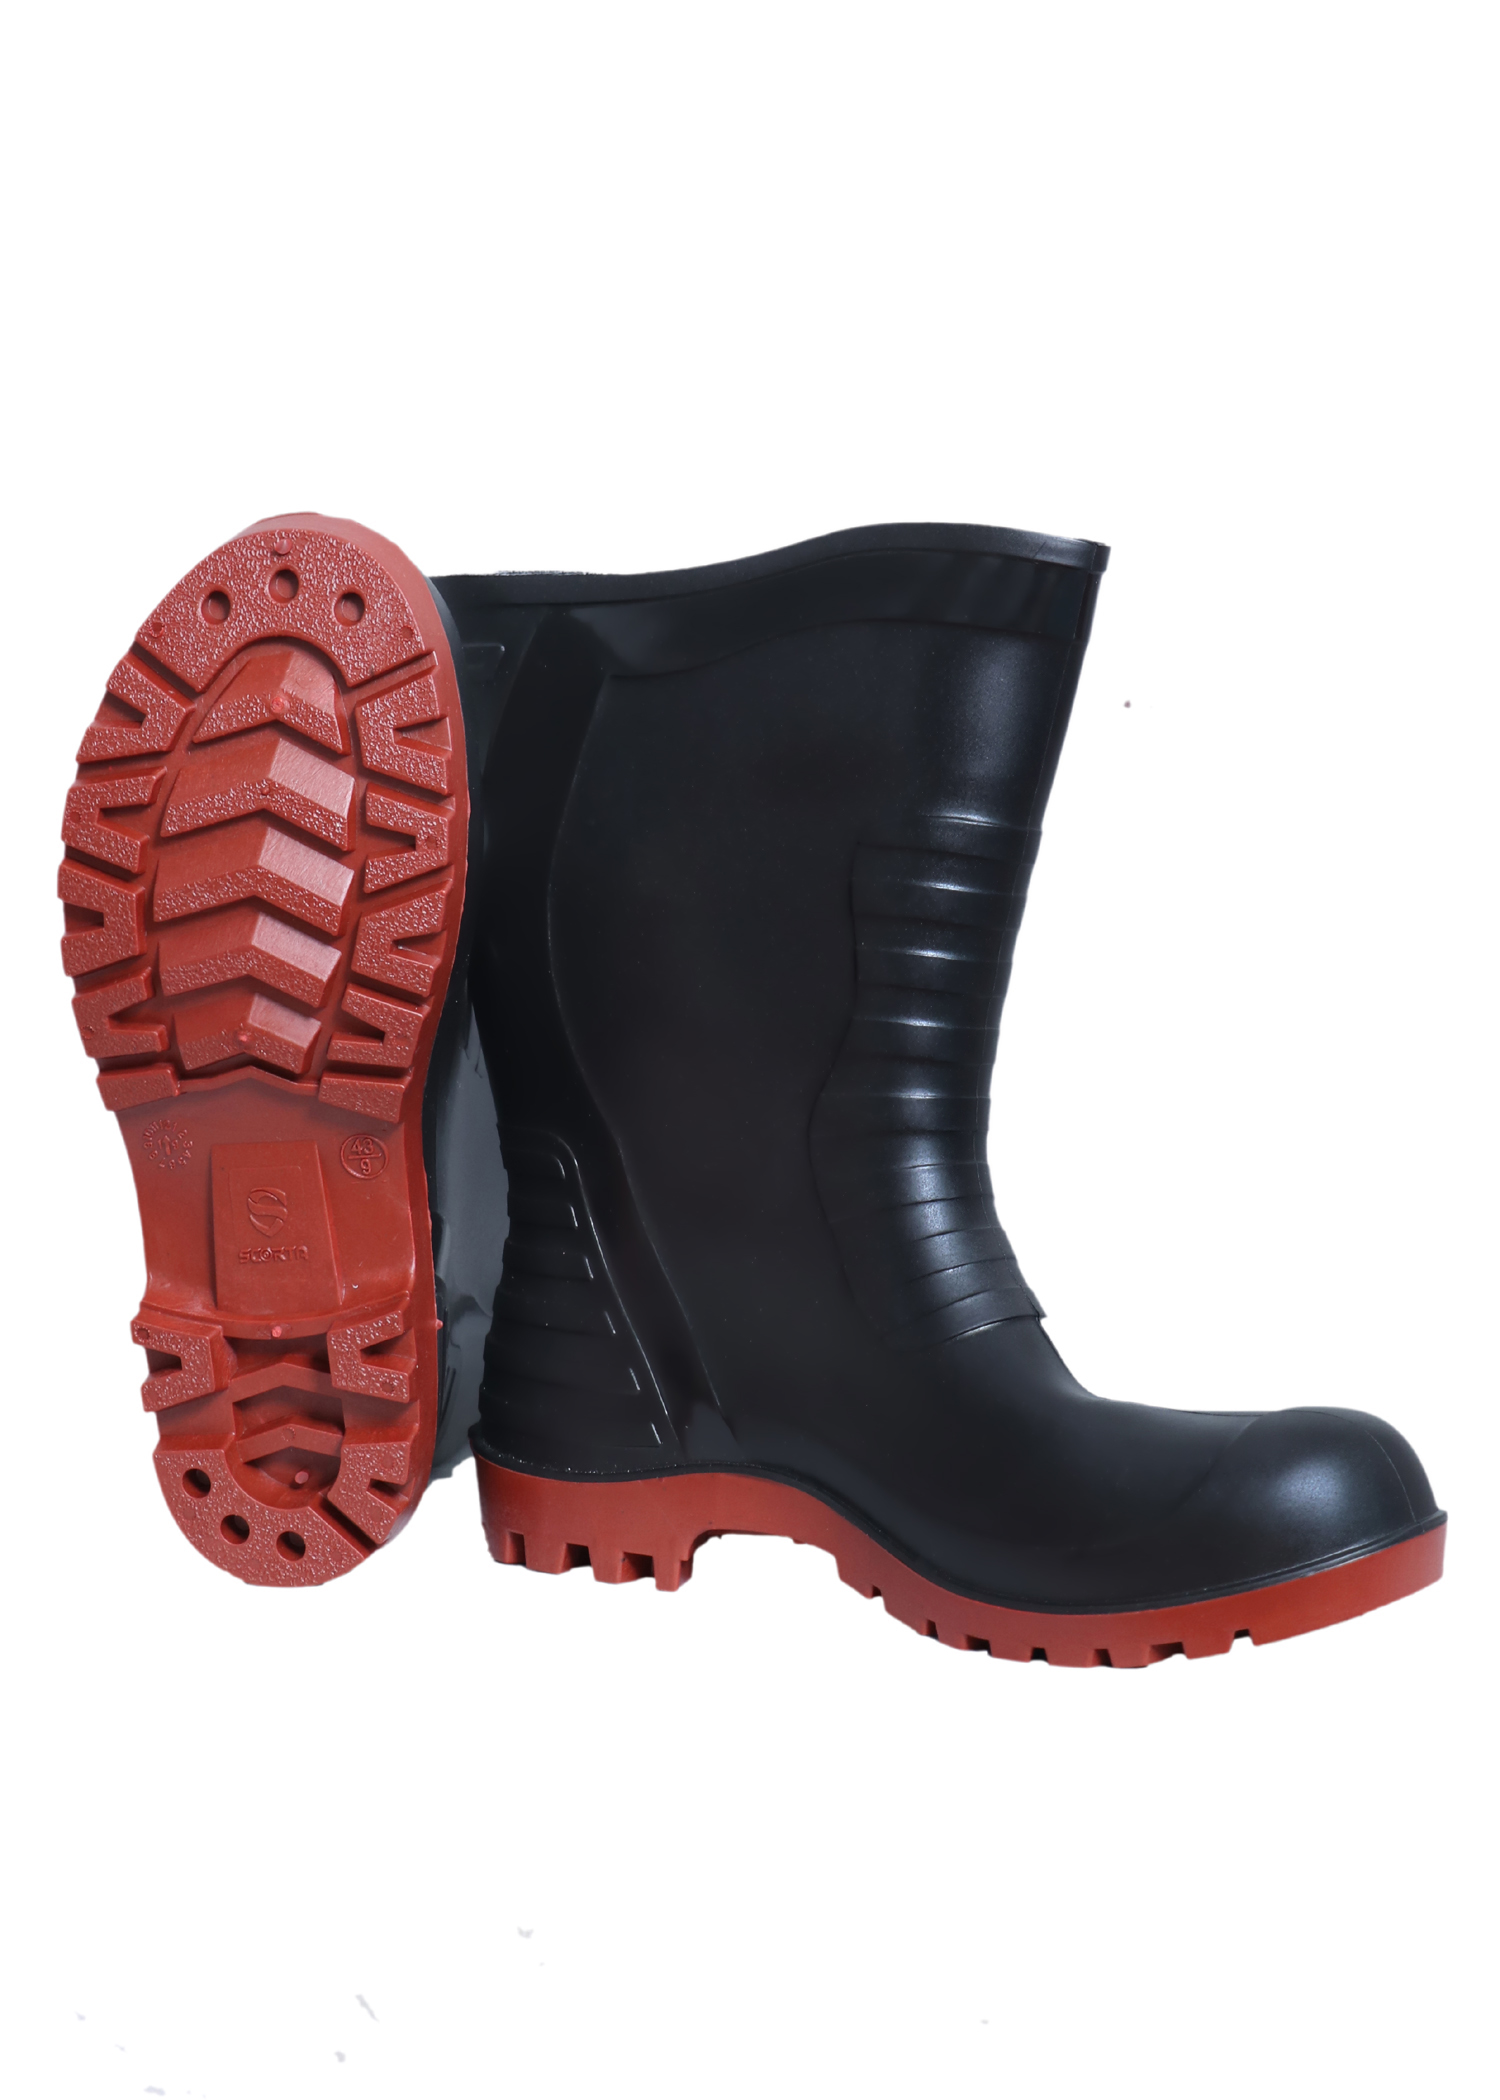 Safety Gumboot Falcon-11